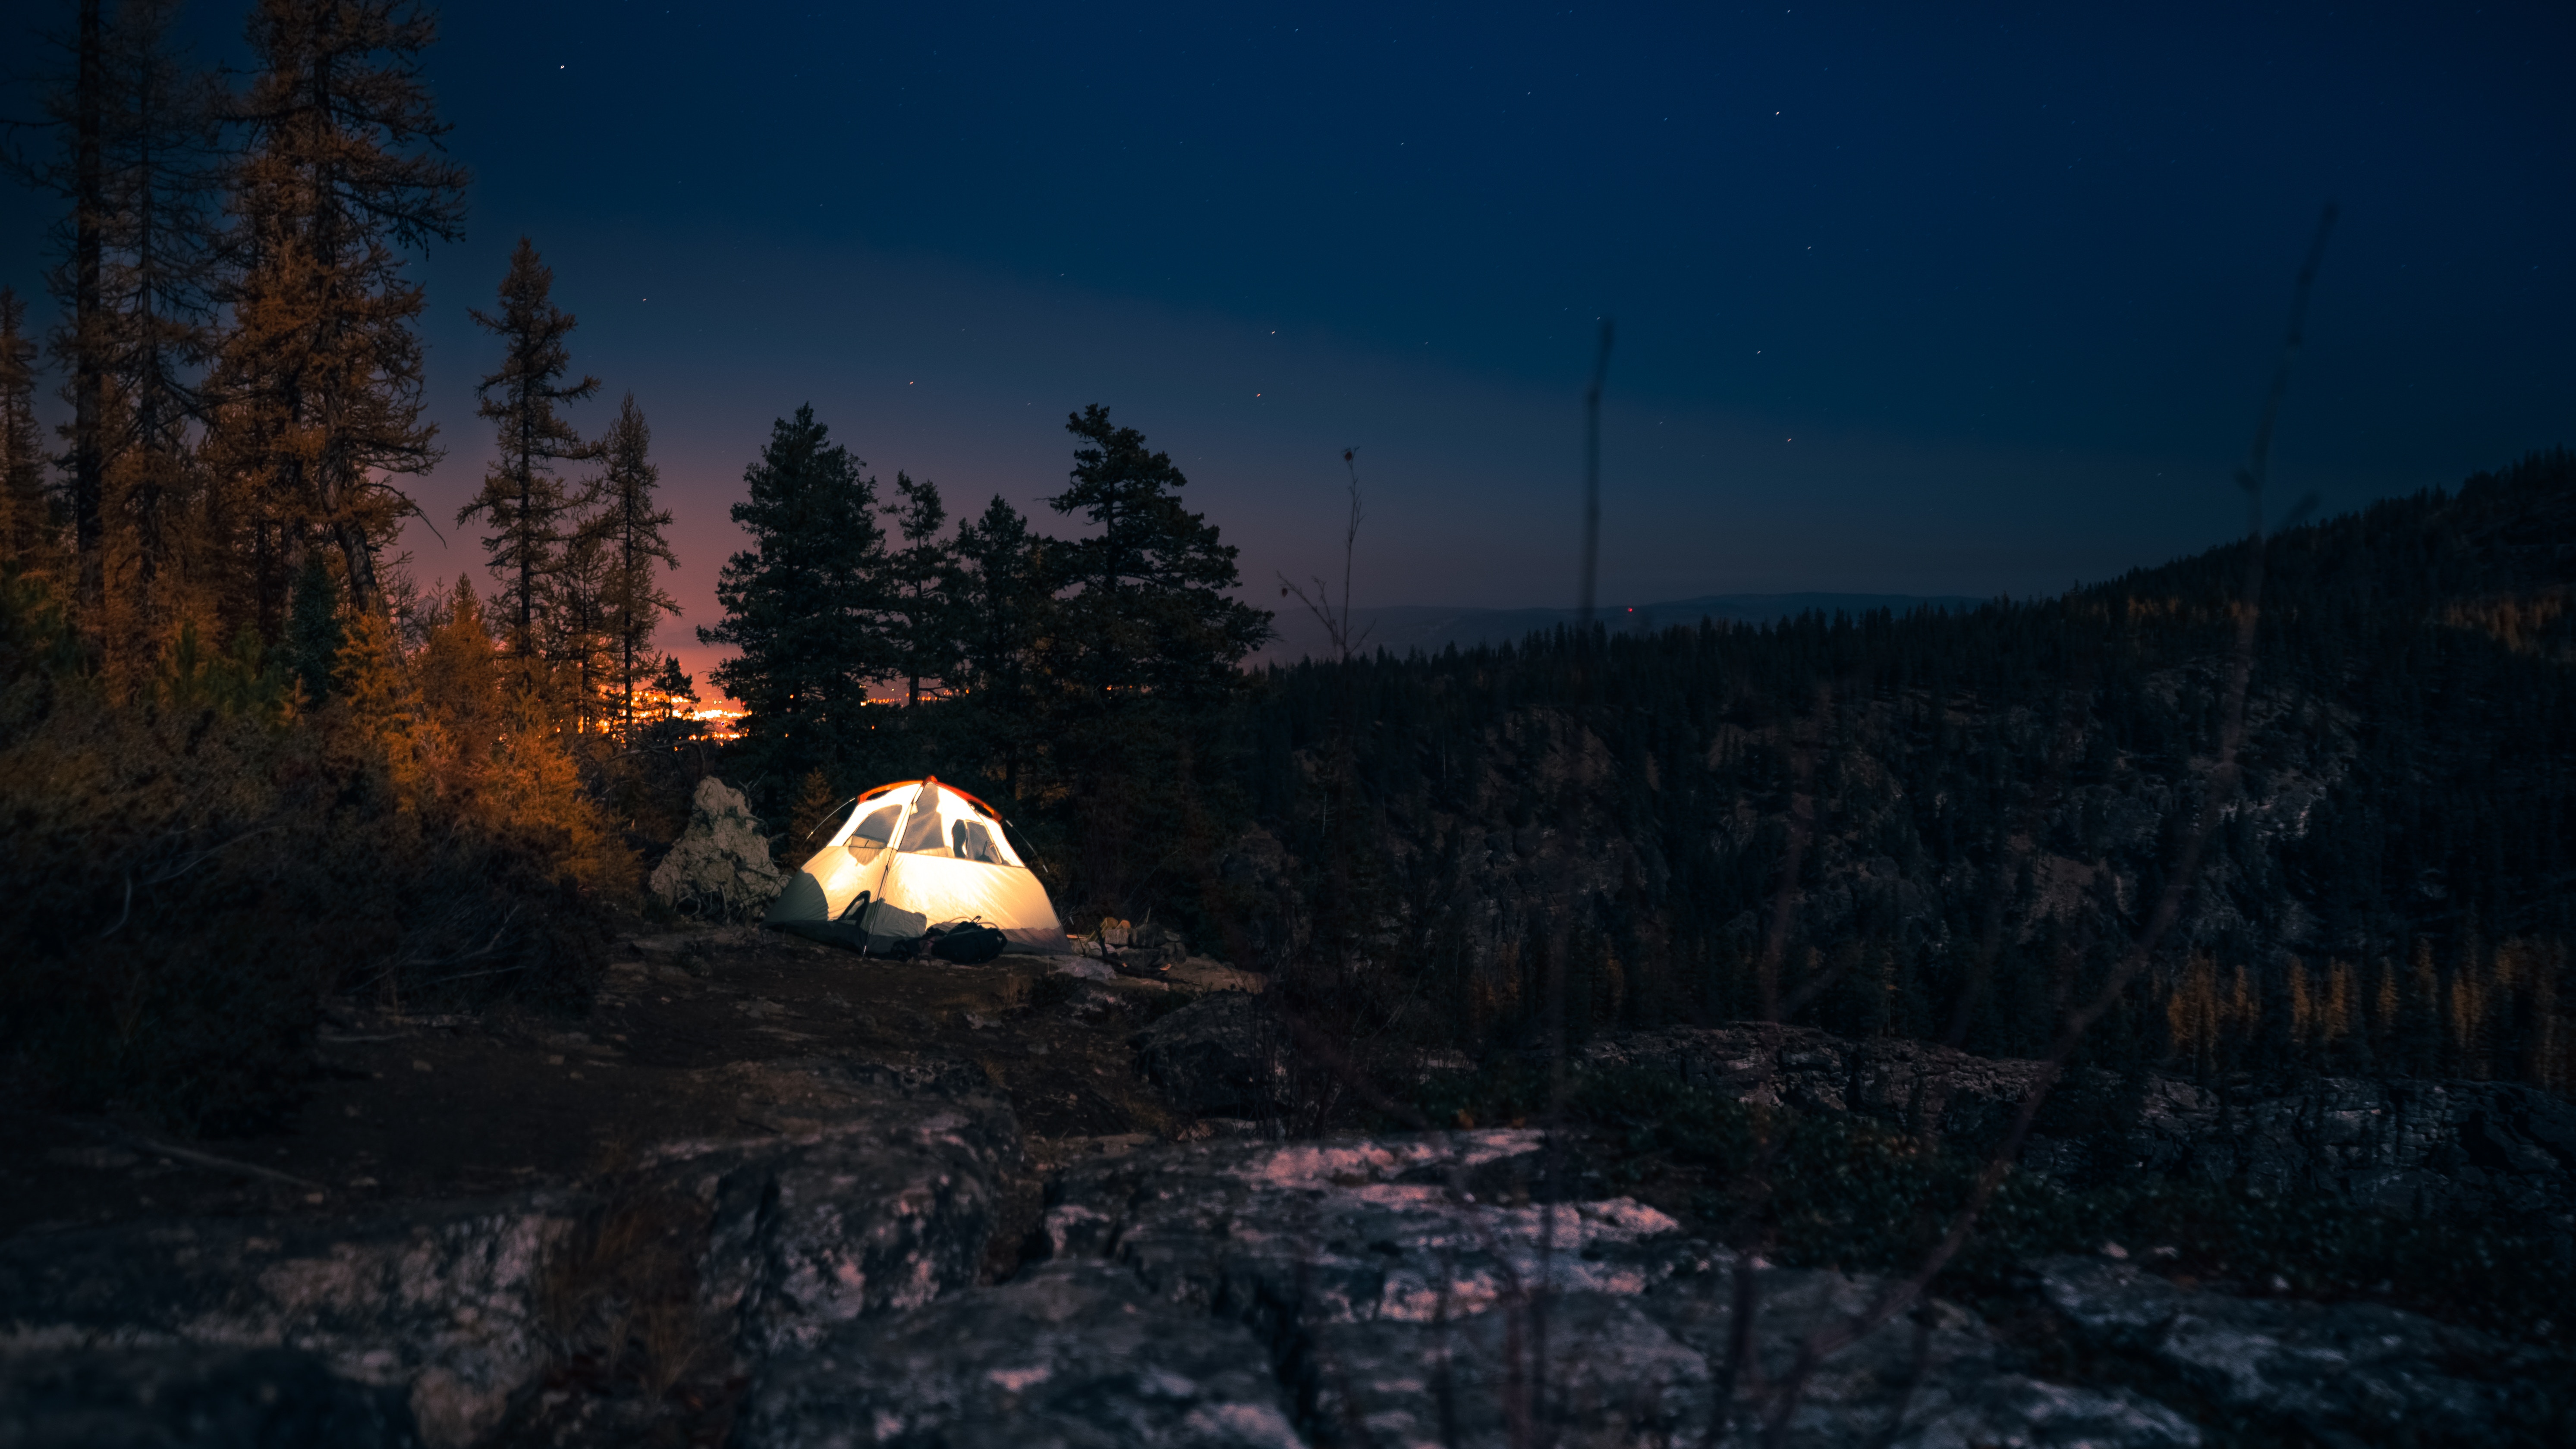 PC Wallpapers dark, trees, night, starry sky, tent, camping, campsite